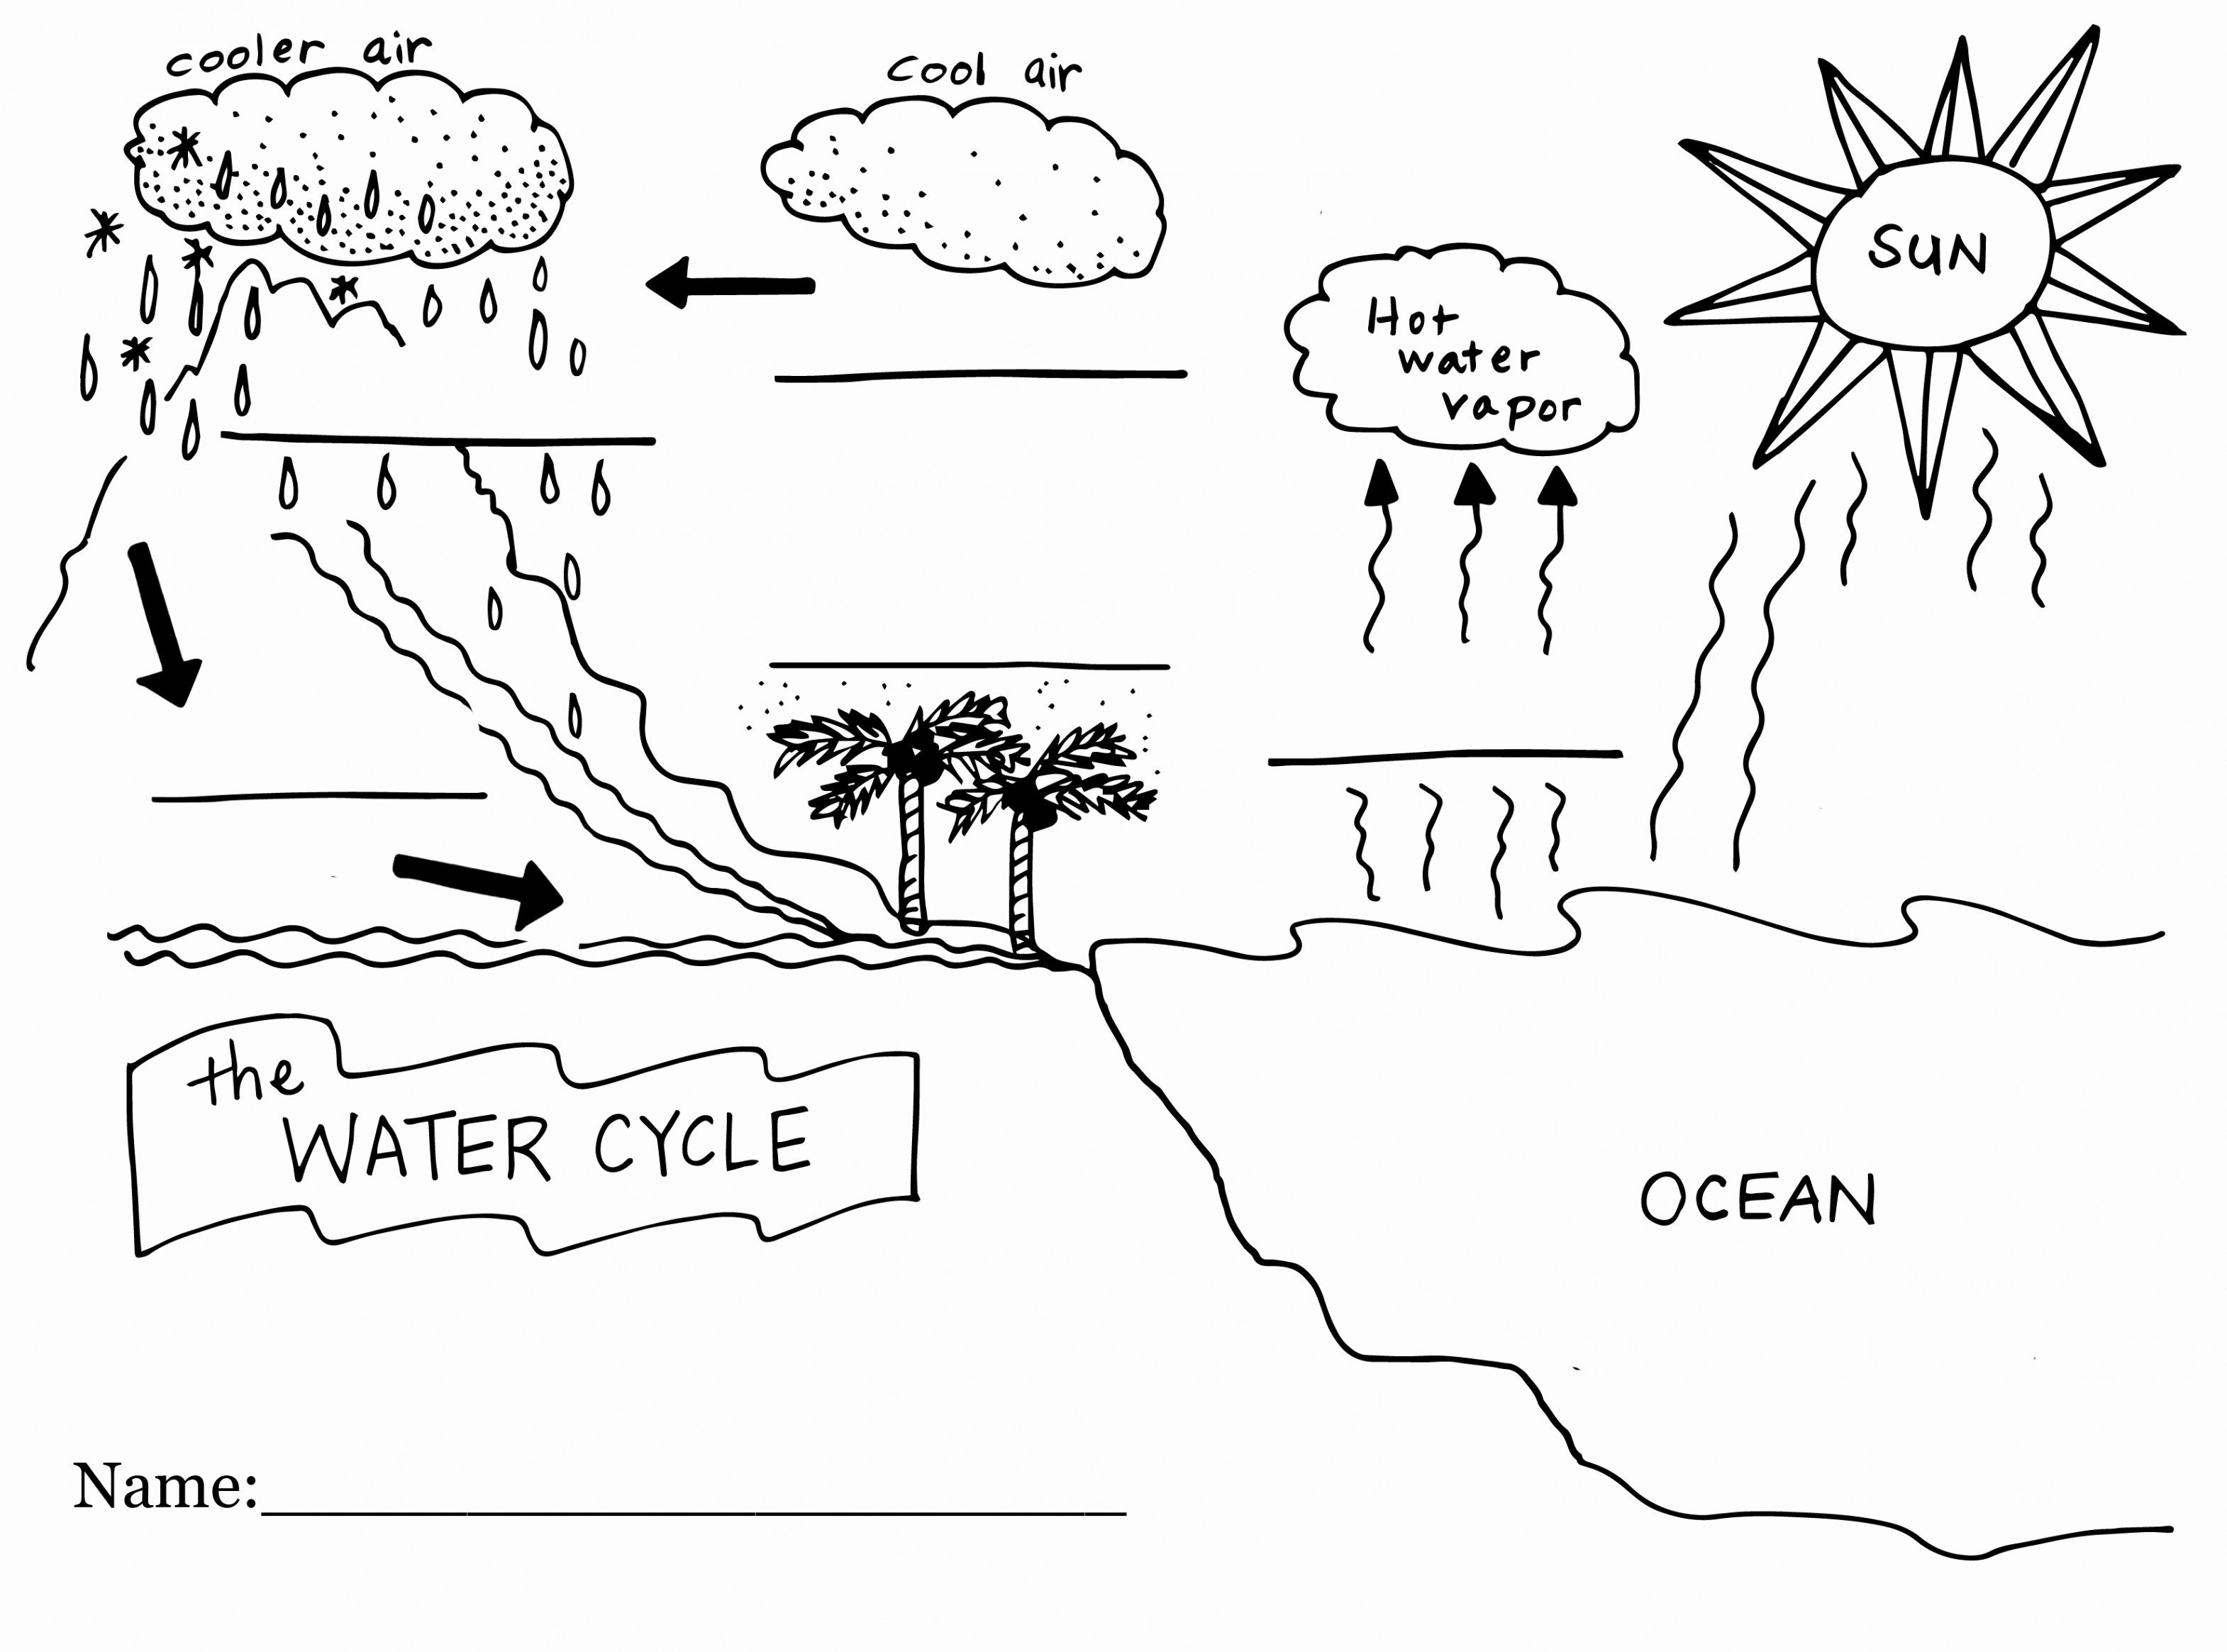 Water Cycle Diagram Labels  Wiring Diagram Blog And Label The Water Cycle Worksheet